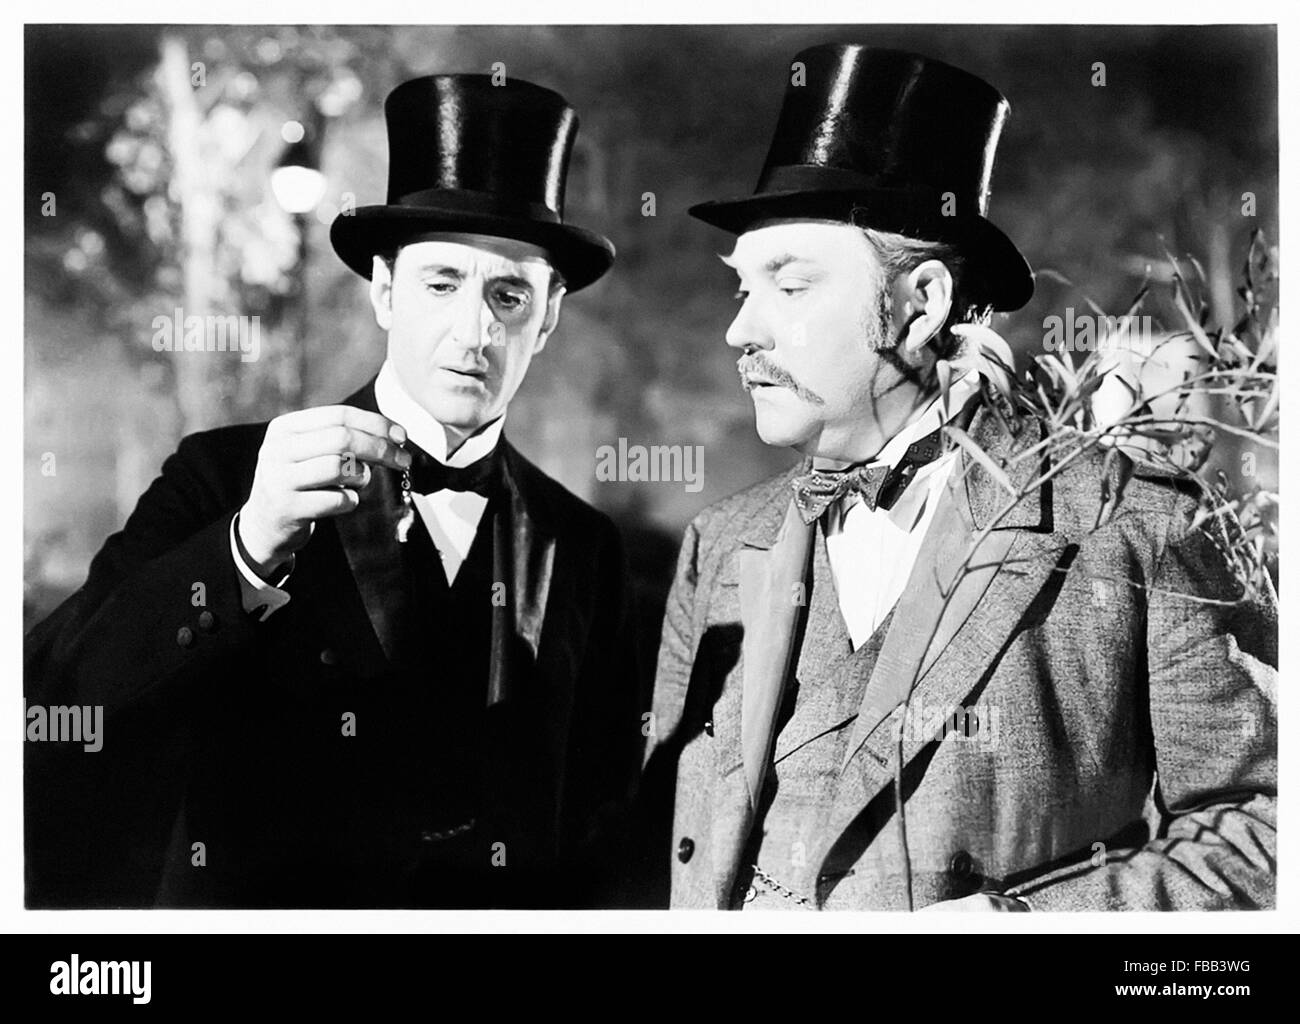 Publicity photograph for 'The Adventures of Sherlock Holmes' 1939 film starring Basil Rathbone (Holmes) and Nigel Bruce (Watson). Stock Photo